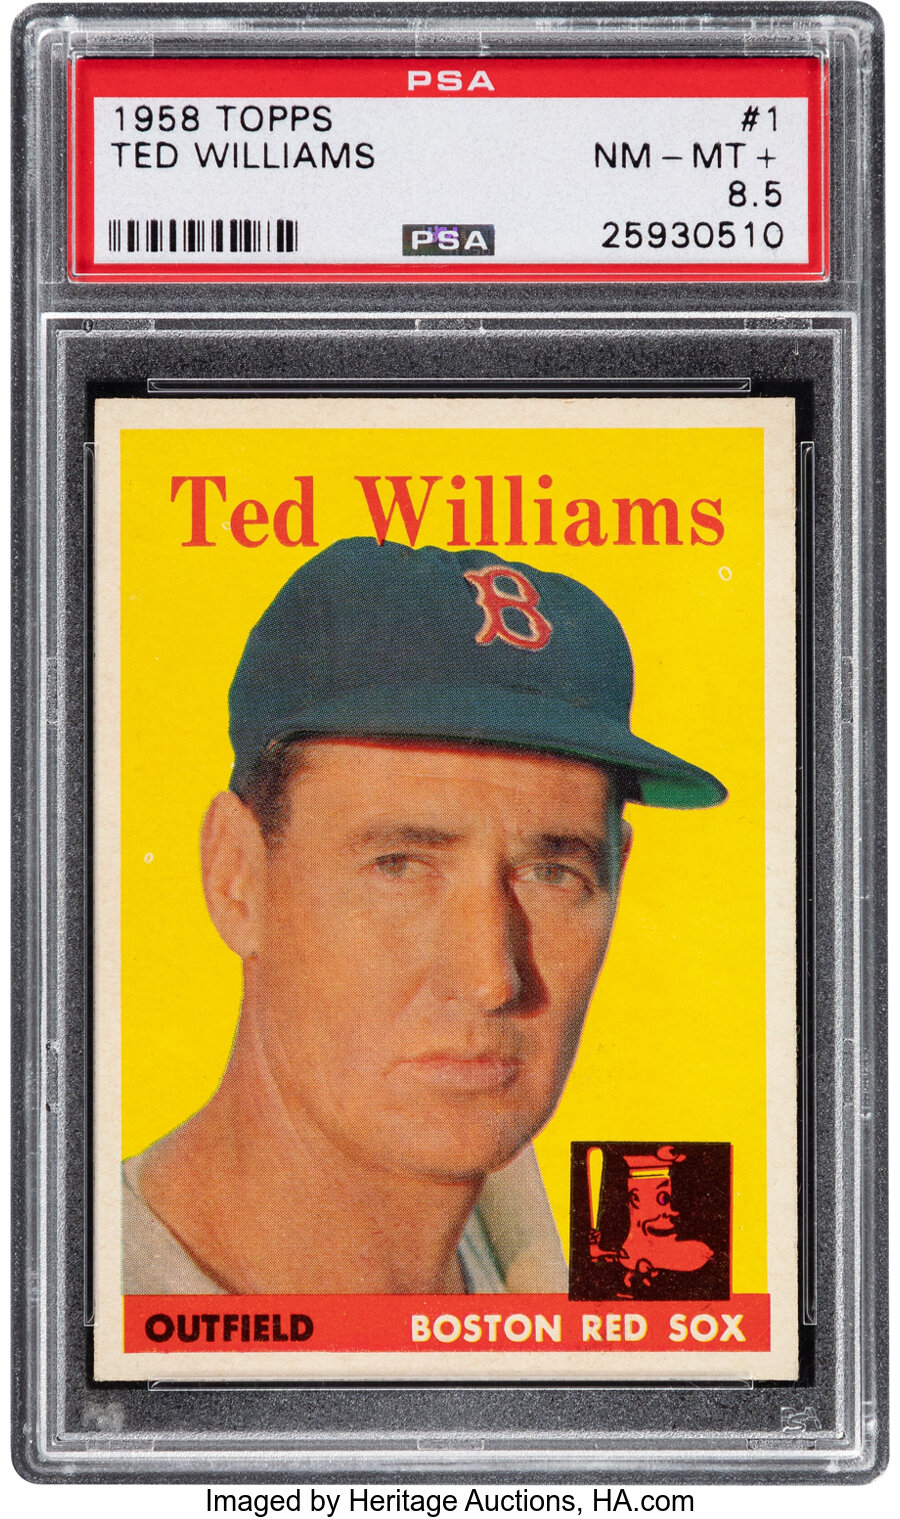 1958 Topps Ted Williams #1 PSA NM-MT+ 8.5